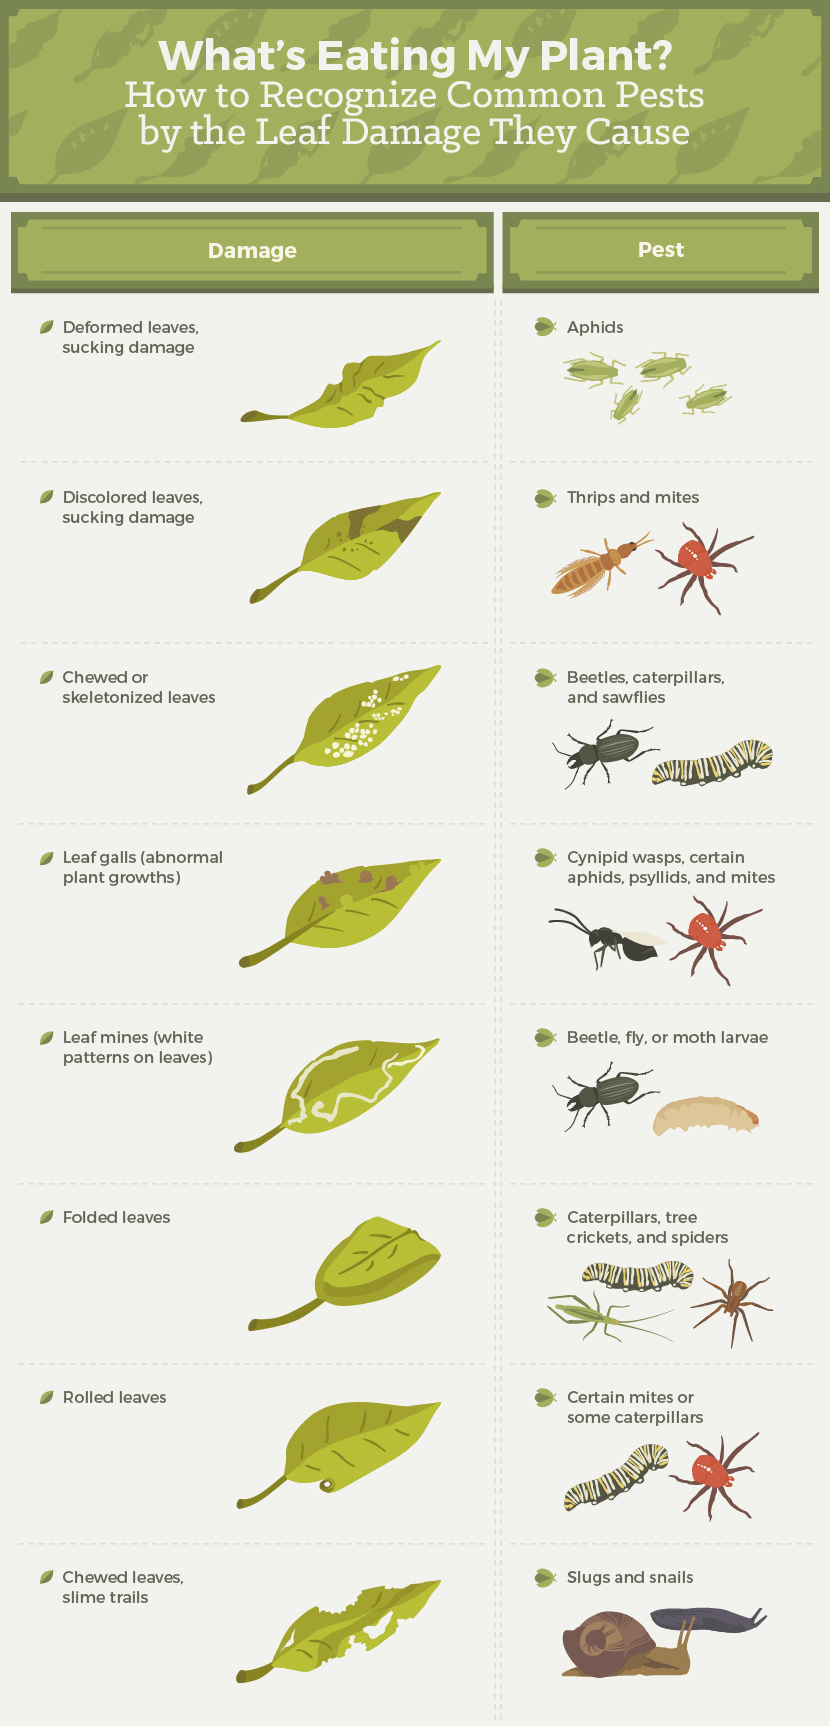 How To Get Rid Of Insects In Garden Naturally - Garden Likes